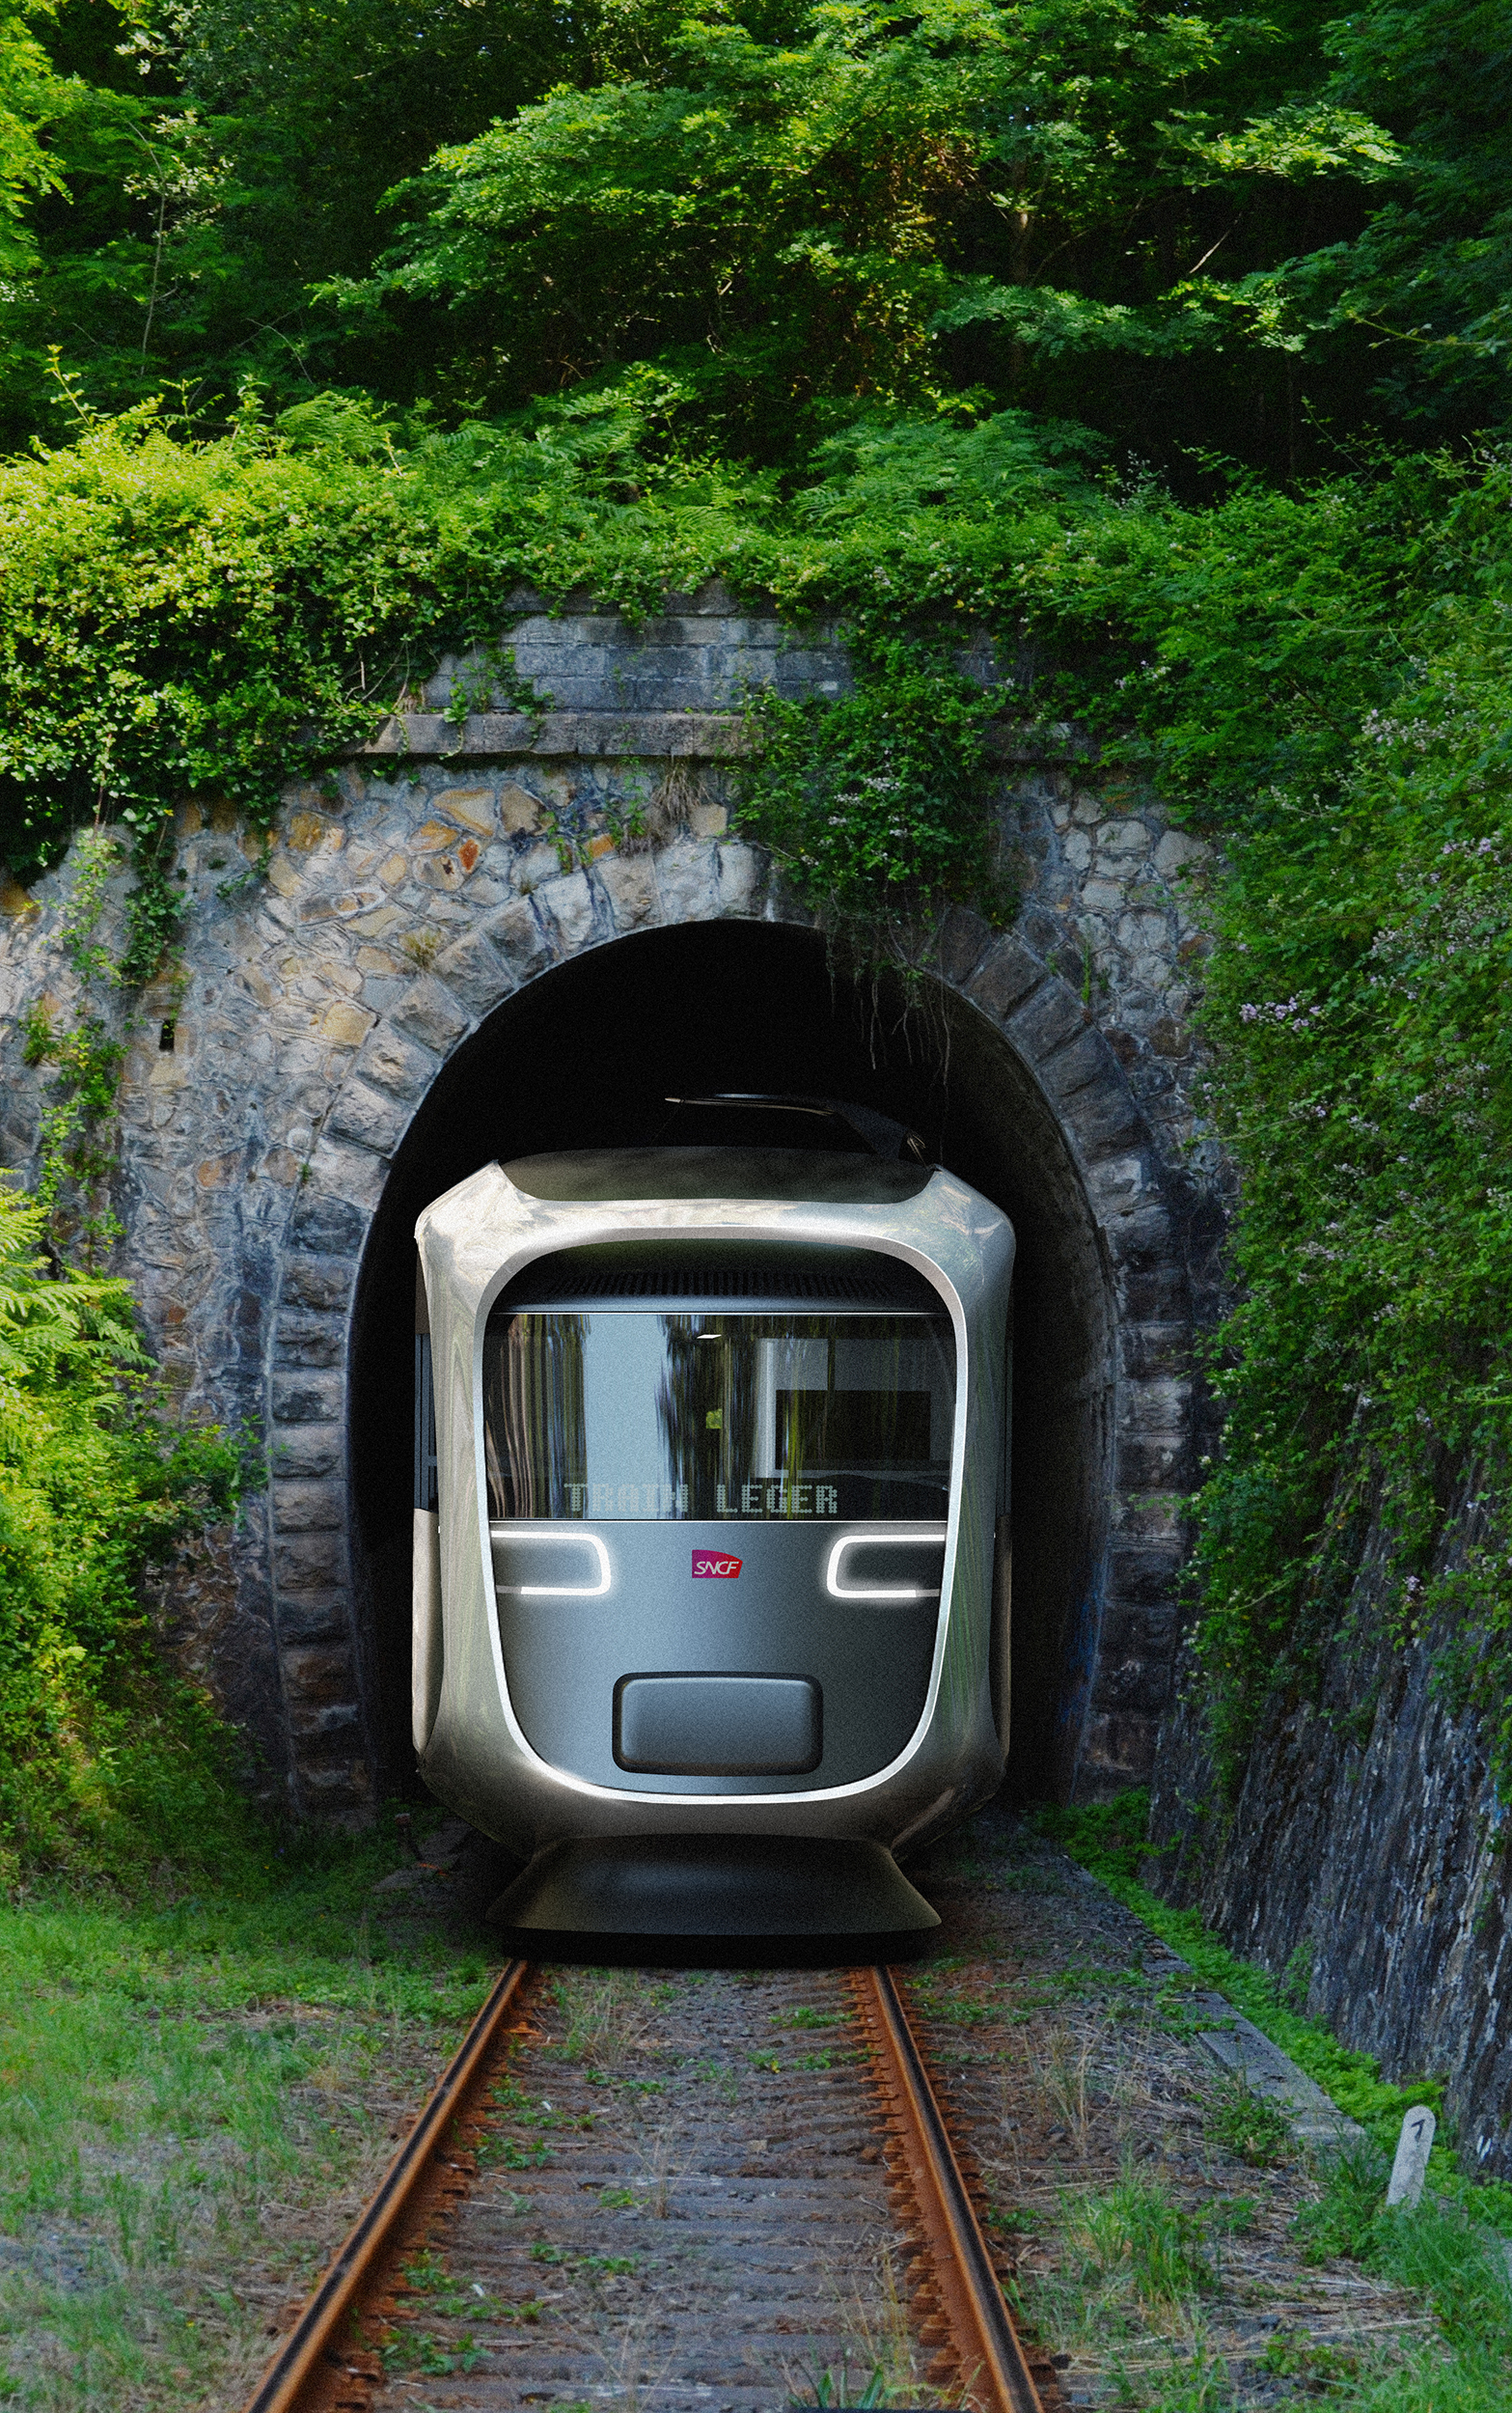 The Innovative Light Train will act as a rural people mover with high frequencies and speed from 100 to 120 Km/h